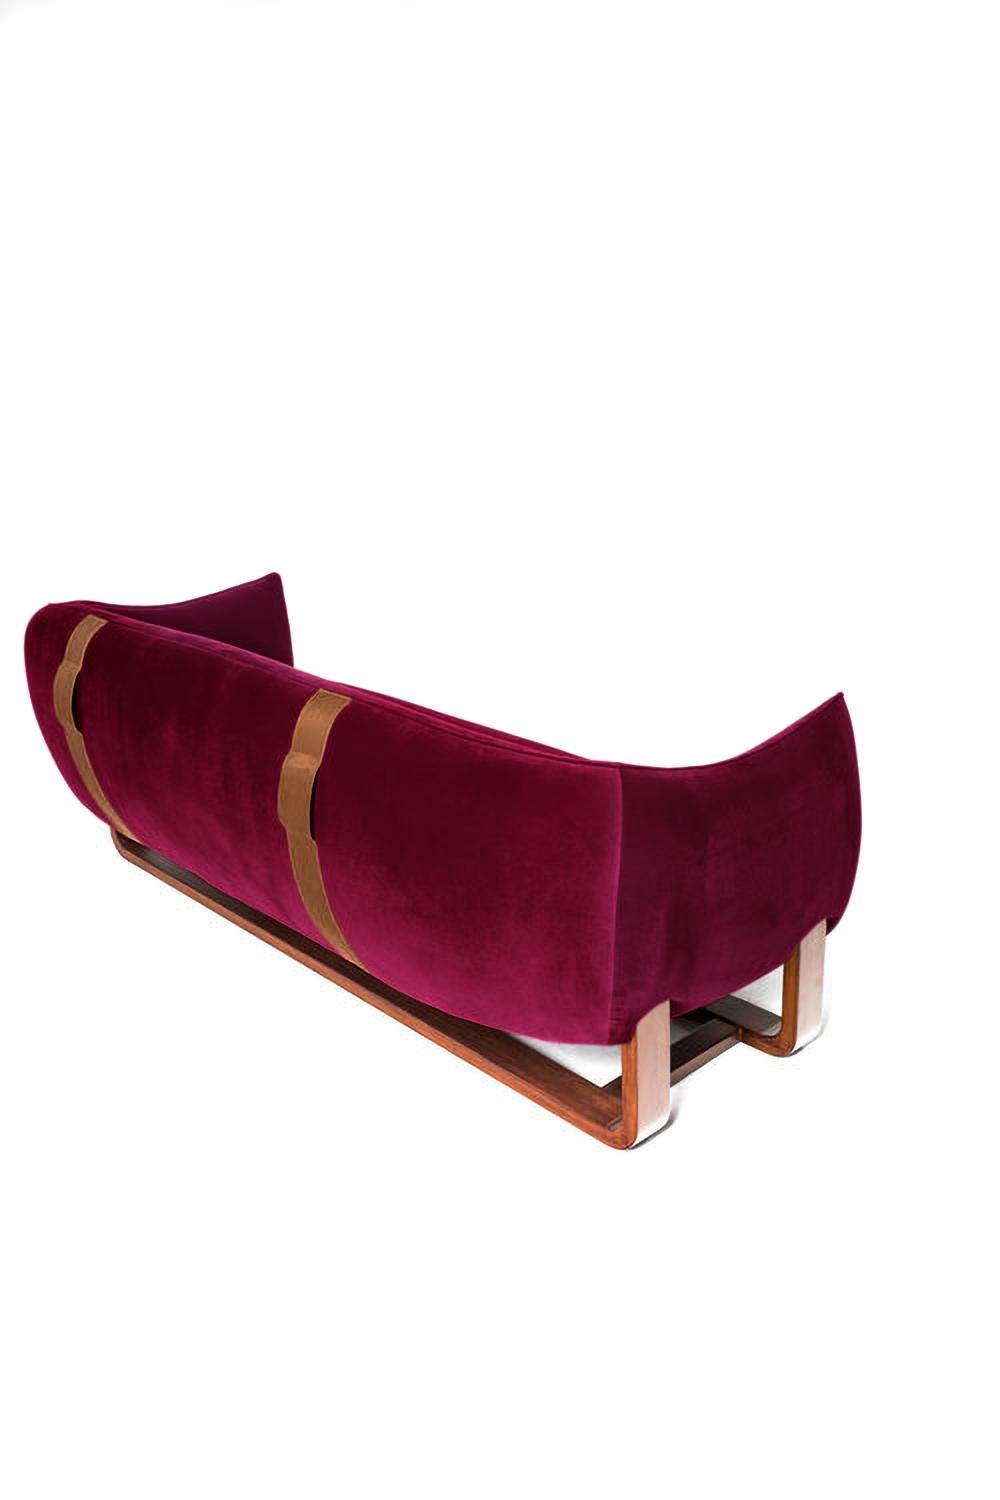 cranberries couch